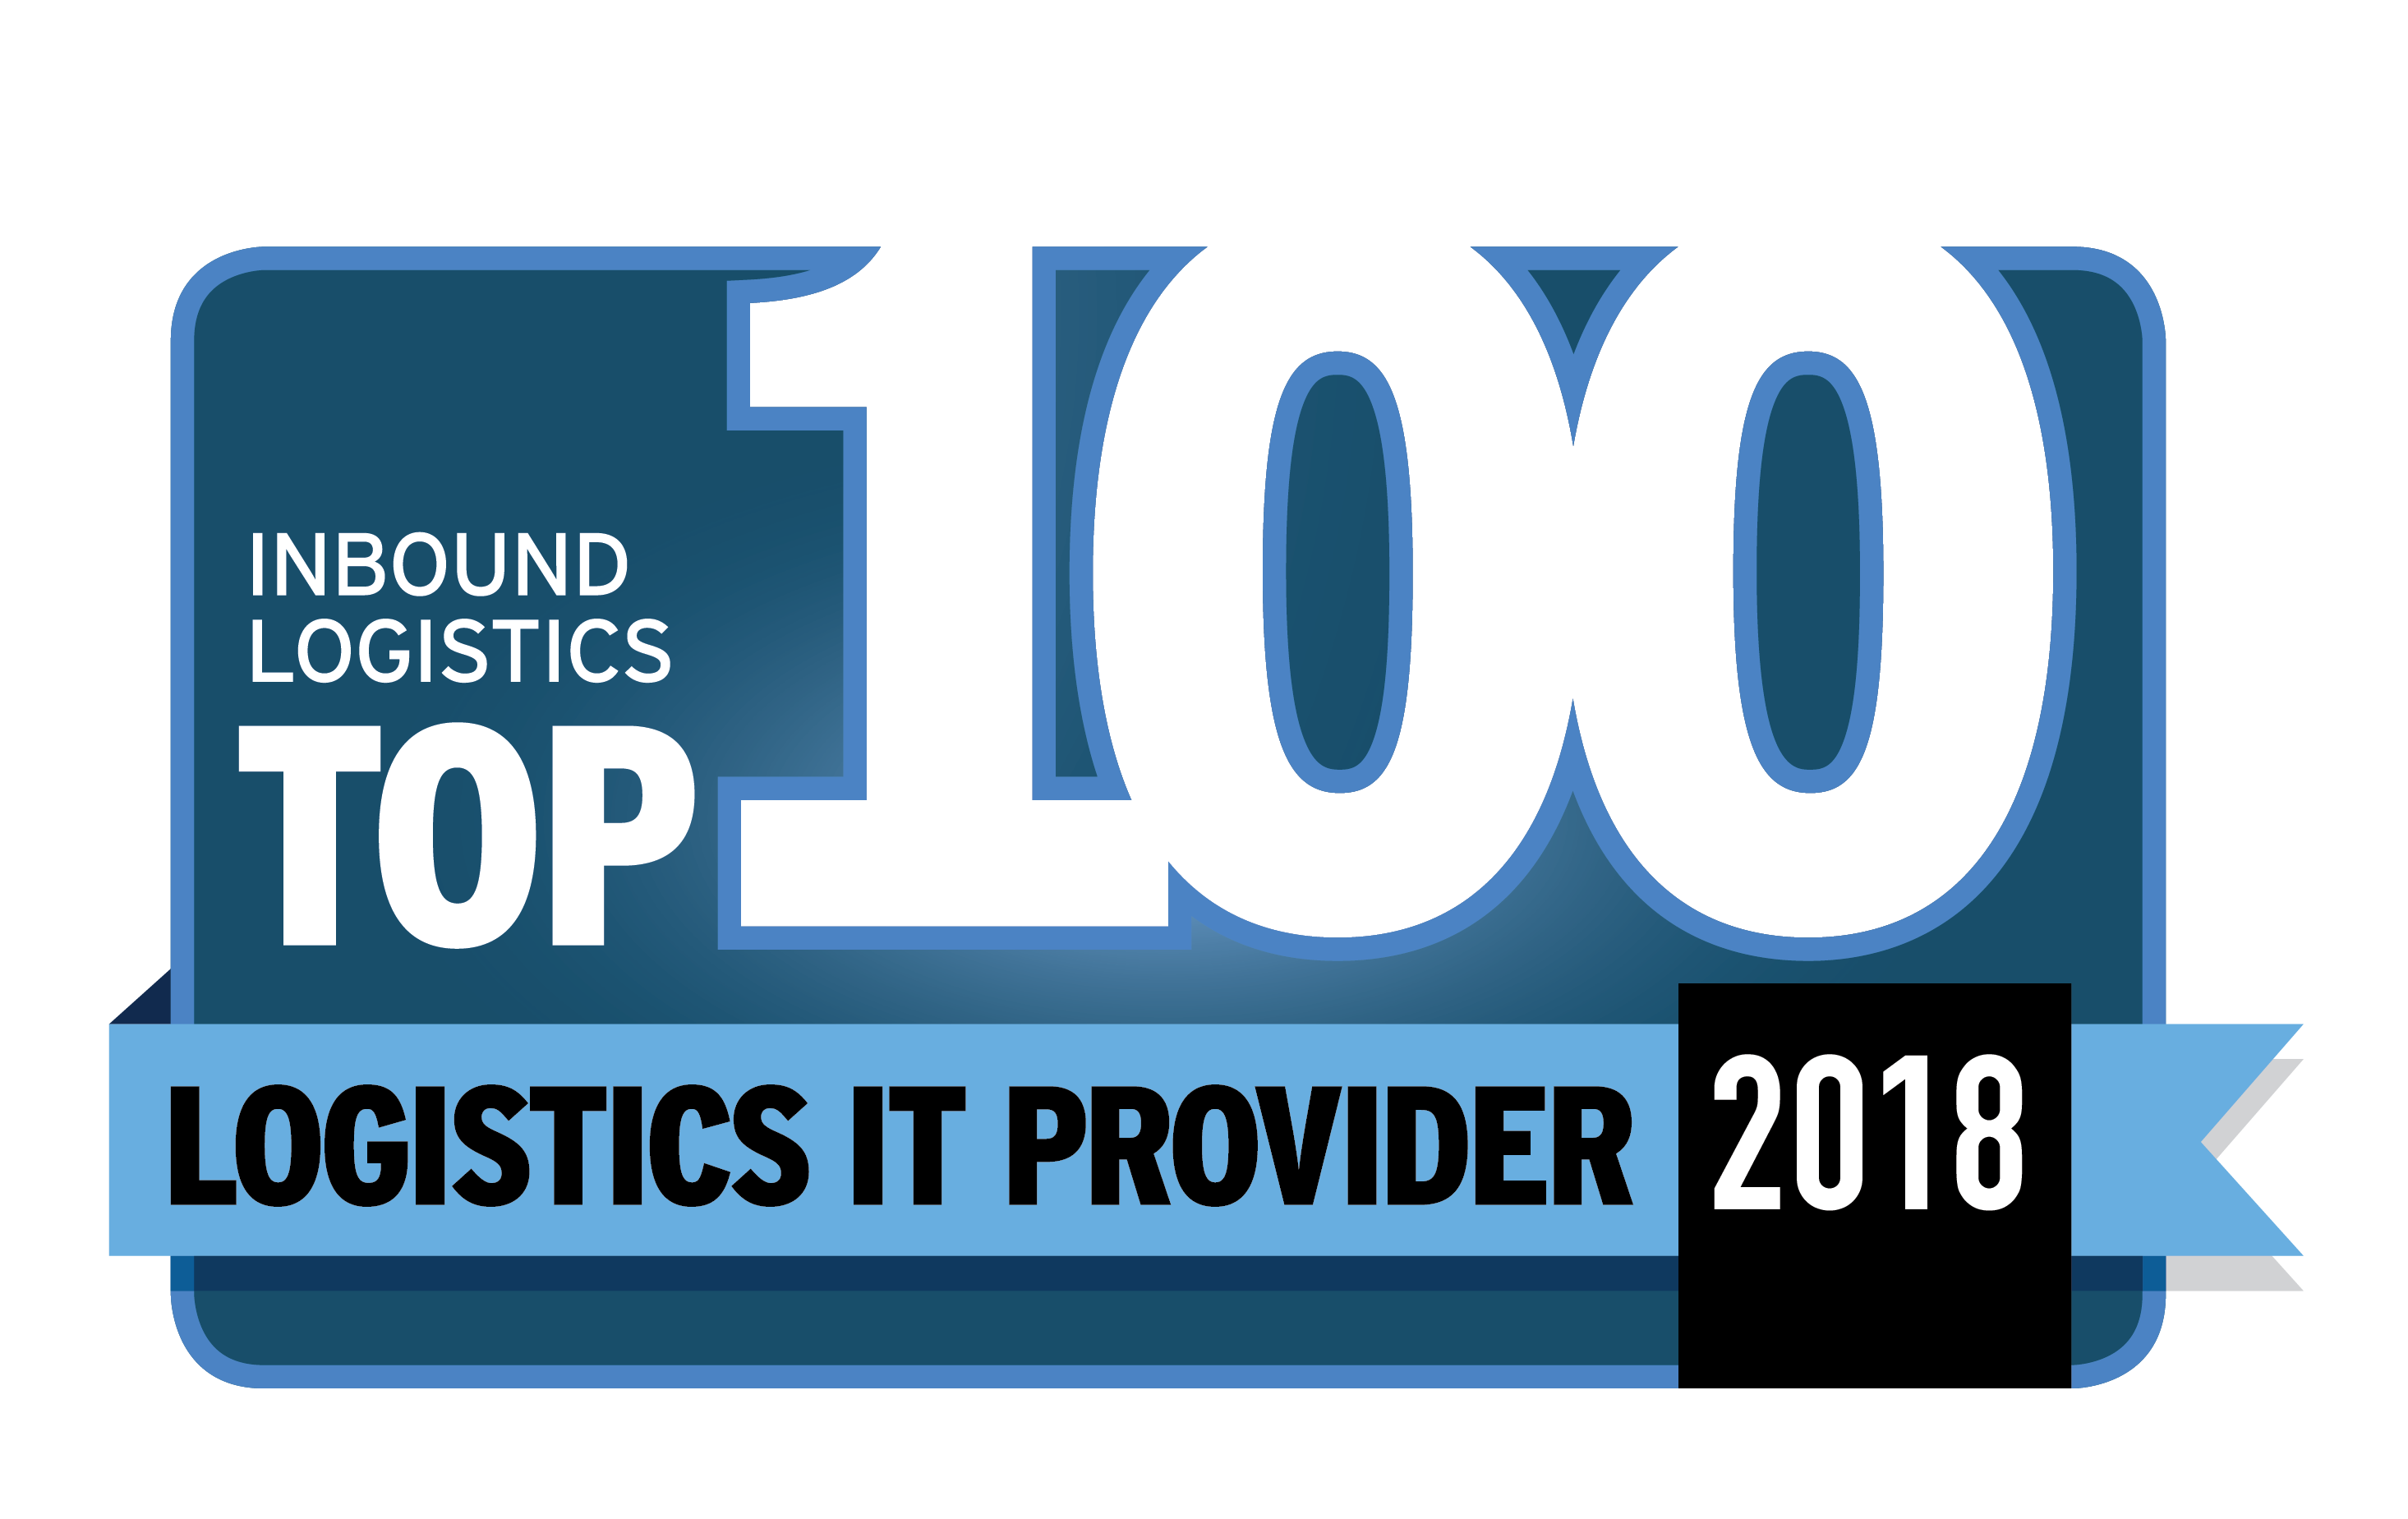 Inbound Logistics Names Cadre Technologies To Its Top 100 It Provider List For 2018 1879